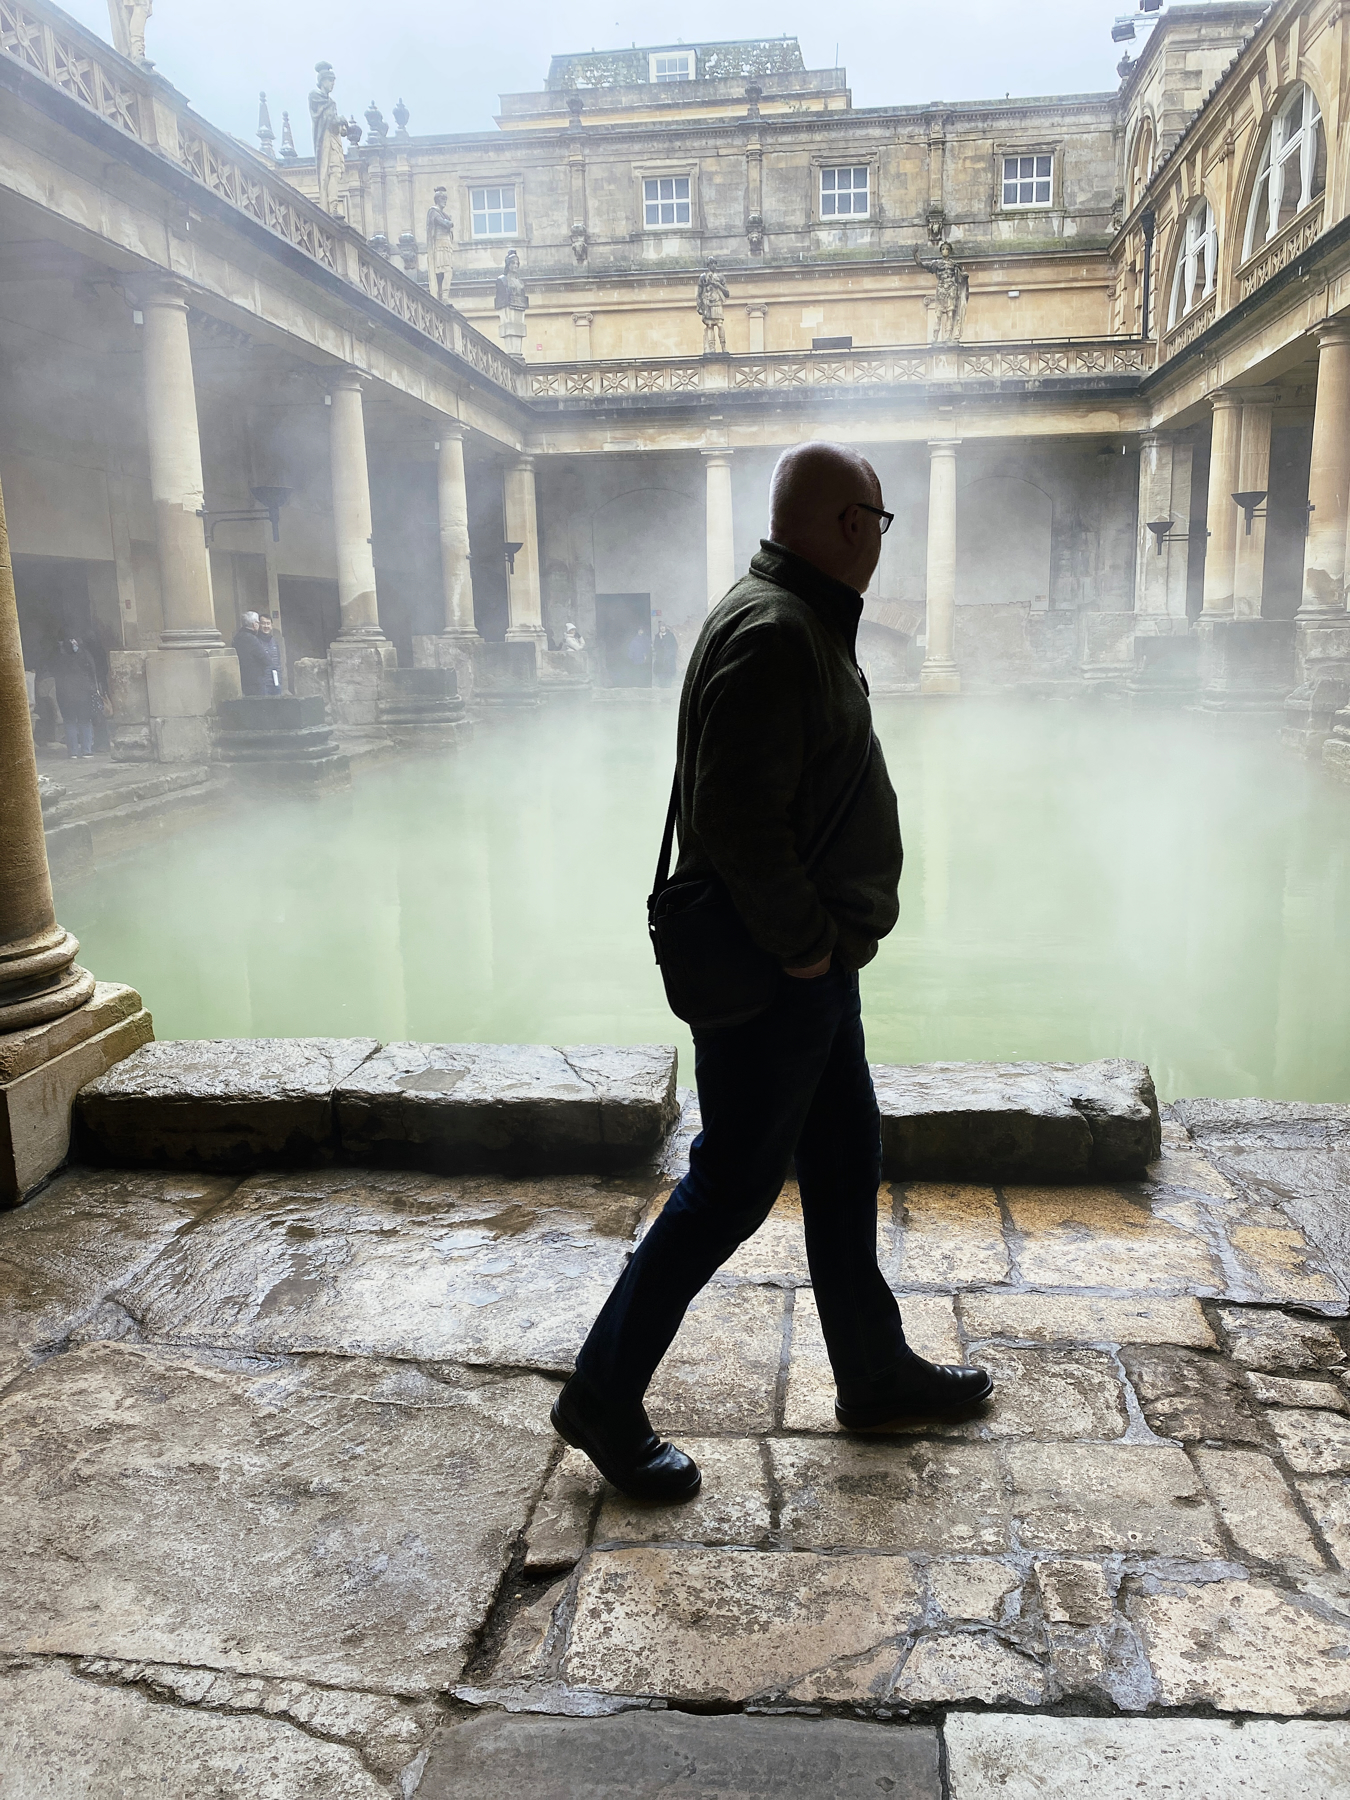 Man silhouetted walking in front of Roman Bath